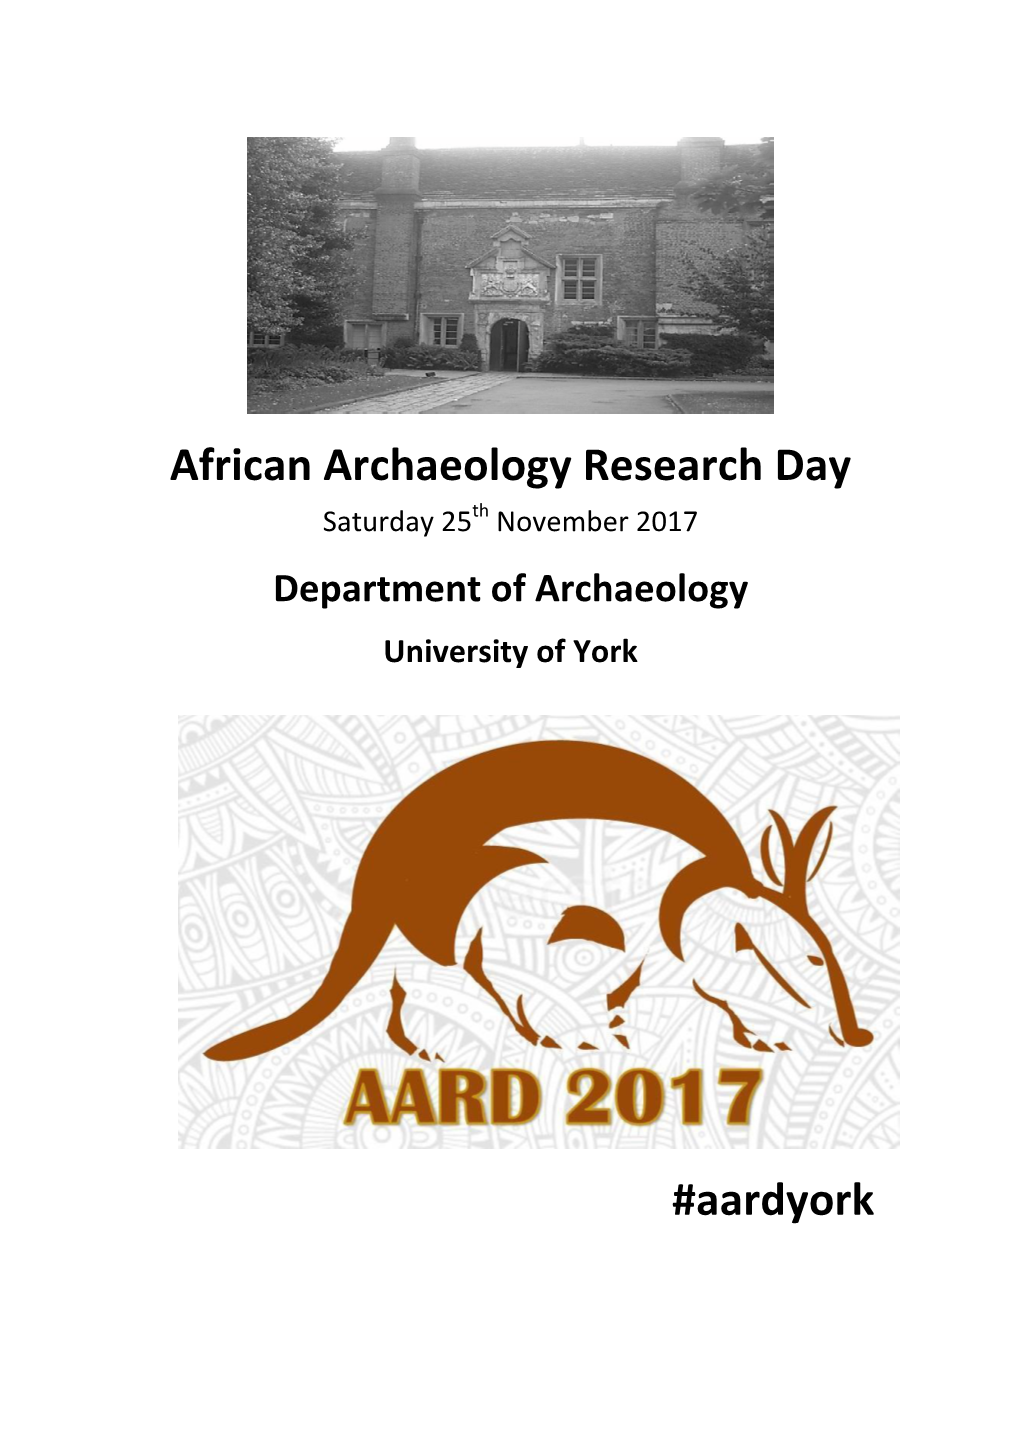 African Archaeology Research Day #Aardyork